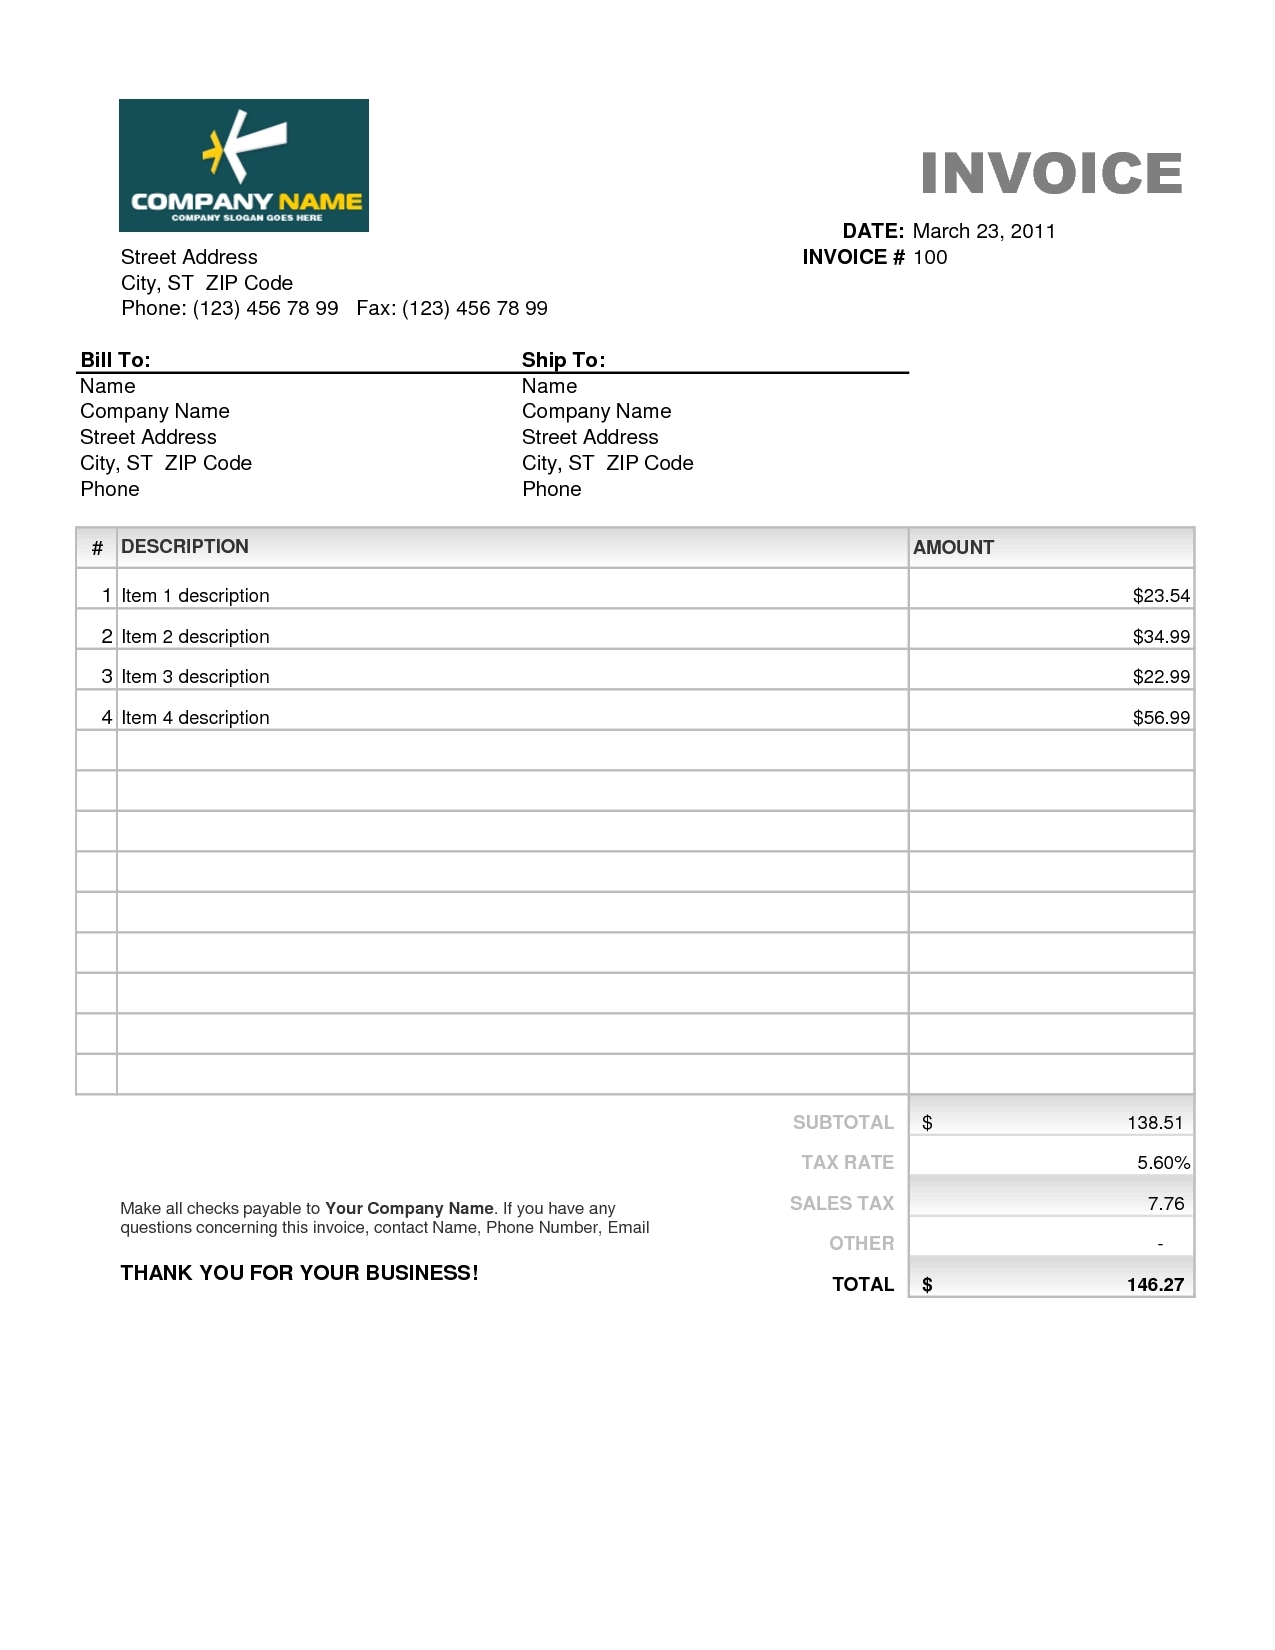 template for invoice free download invoice template free 2016 invoice template to download